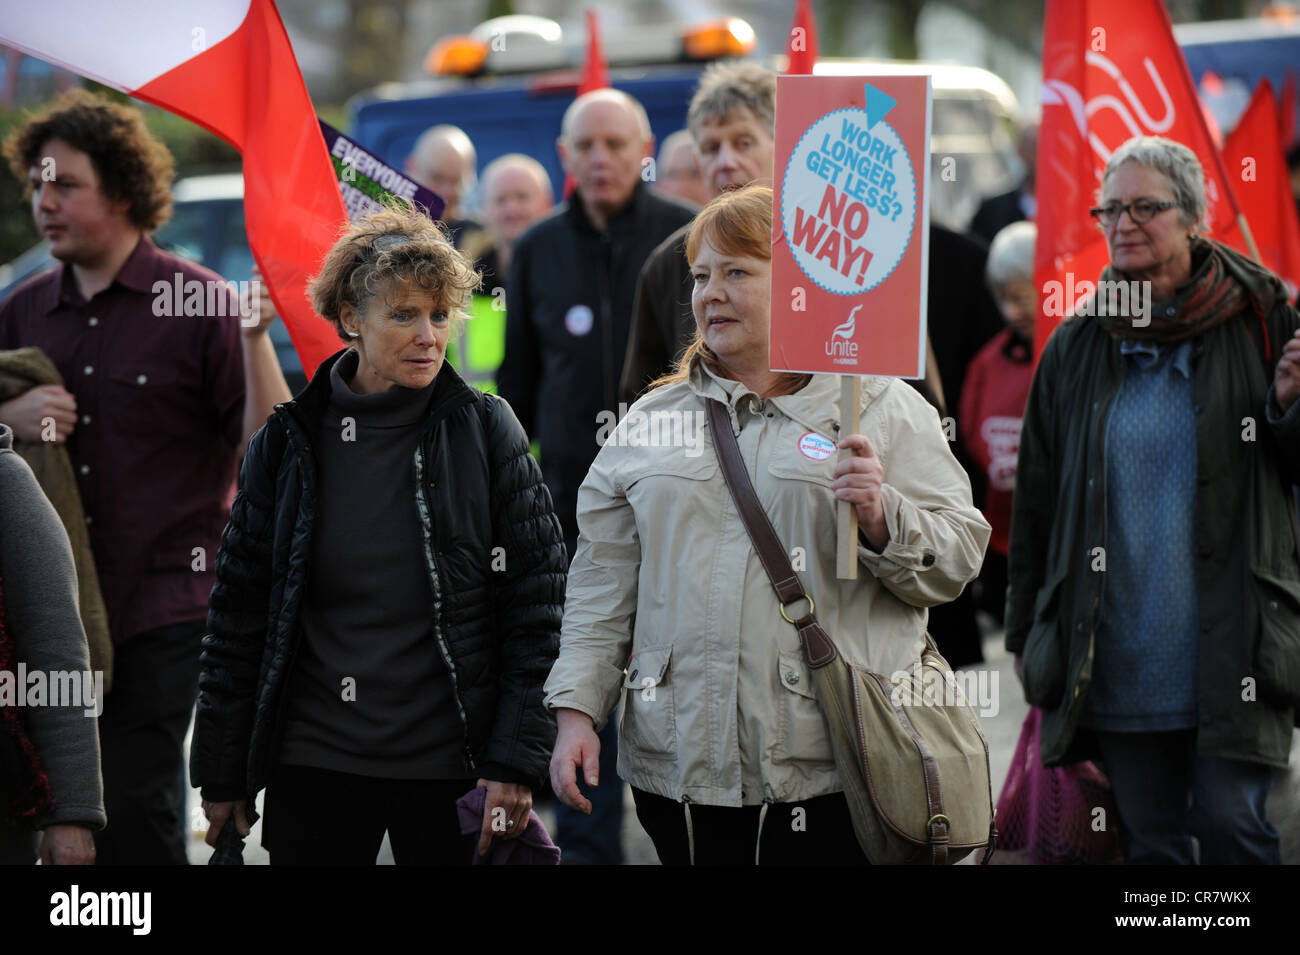 Public sector workers taking part in a one day strike to defend their pension rights head to a rally at the Level in Brighton Stock Photo